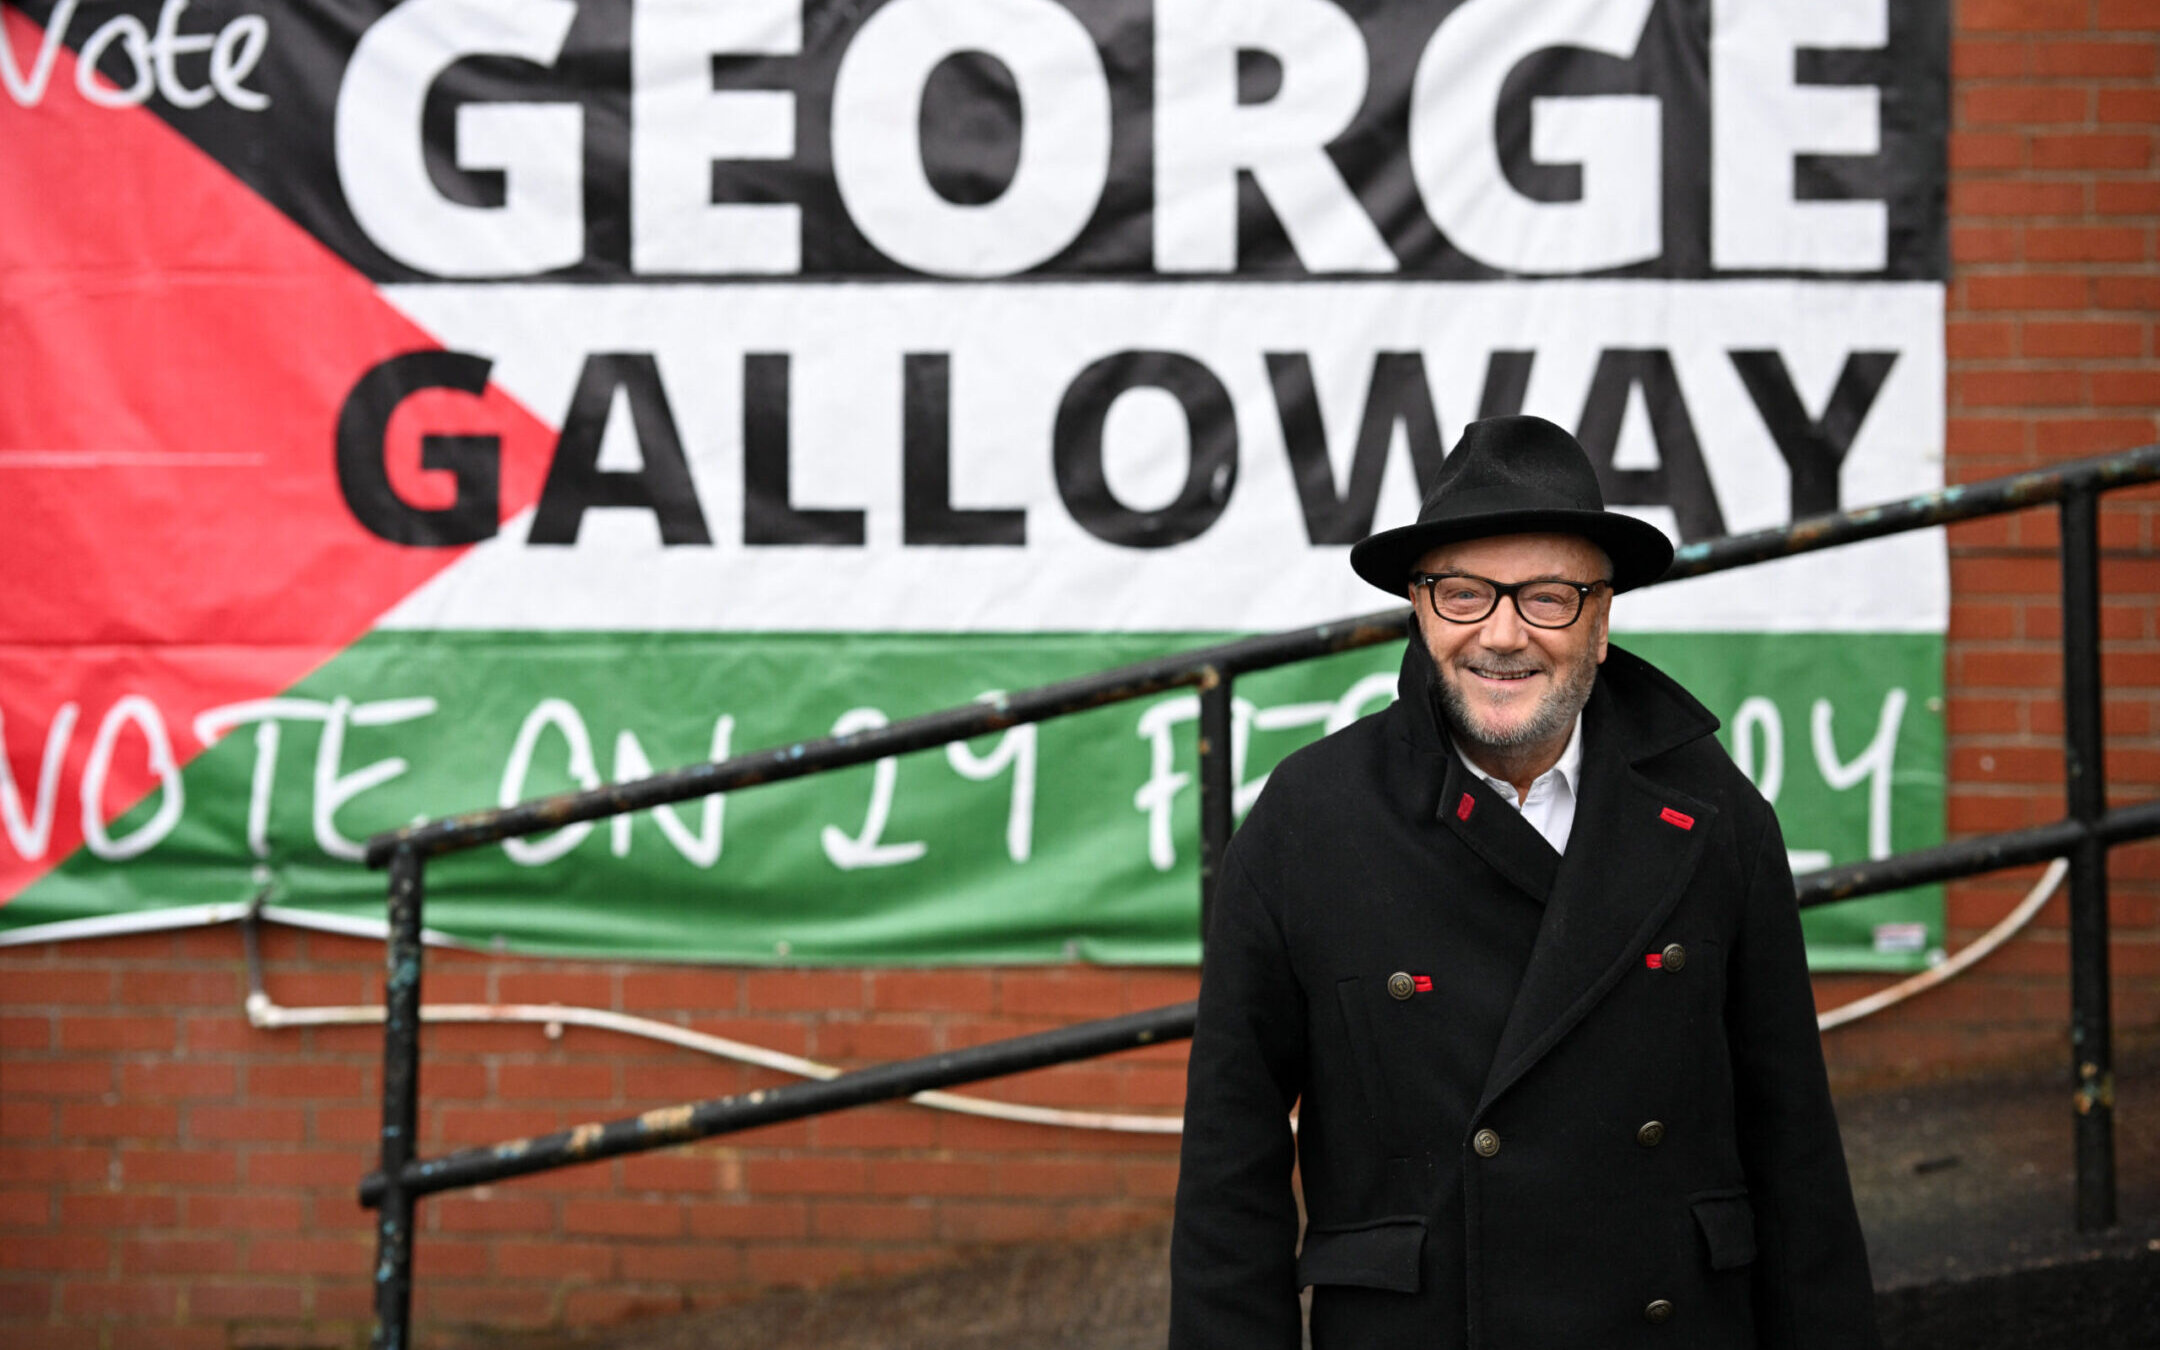 The new Workers Party Member of Parliament for Rochdale, George Galloway, poses for a photograph outside his campaign headquarters in northern England on March 1, 2024, after a campaign that focused on Gaza. (Oli Scarff/AFP via Getty Images)